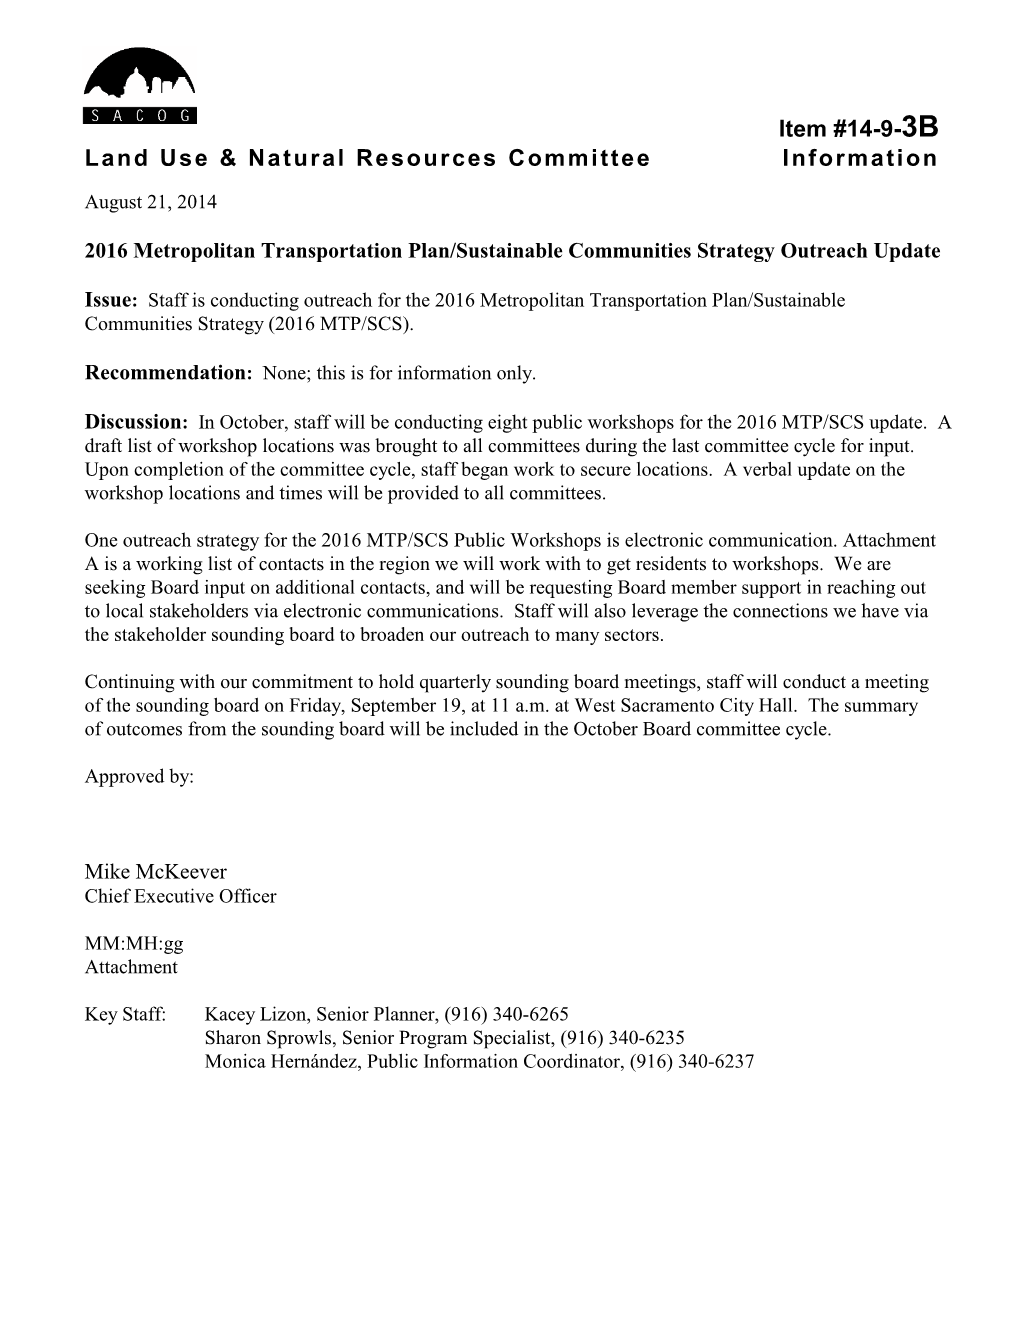 Item #14-9-3B Land Use & Natural Resources Committee Information